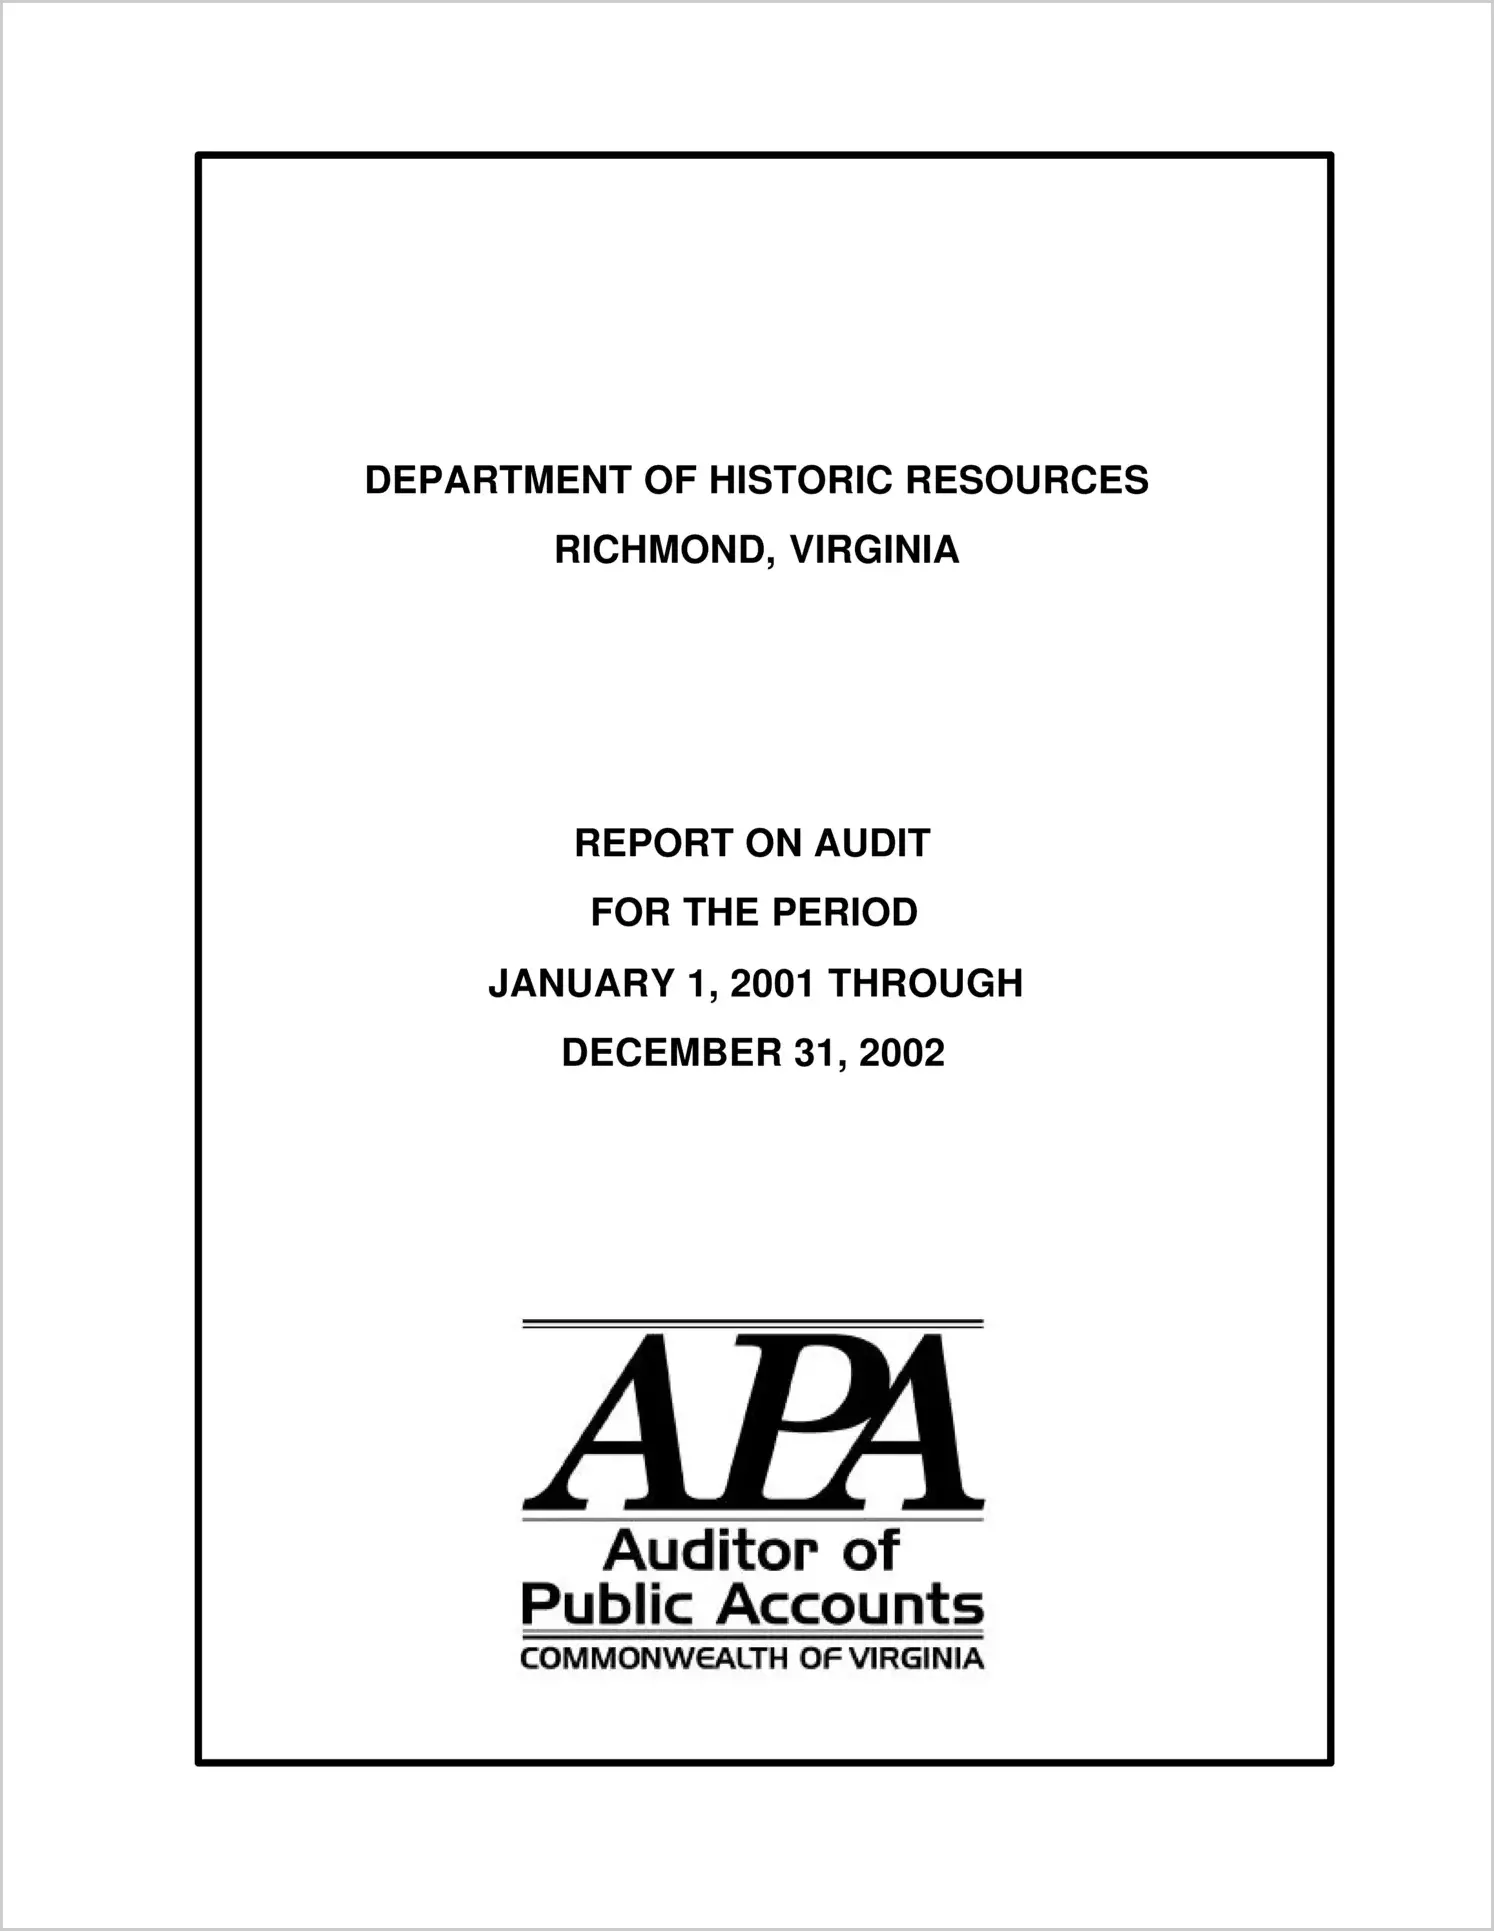 Department of Historic Resources for the period January 1, 2001 through December 31, 2002